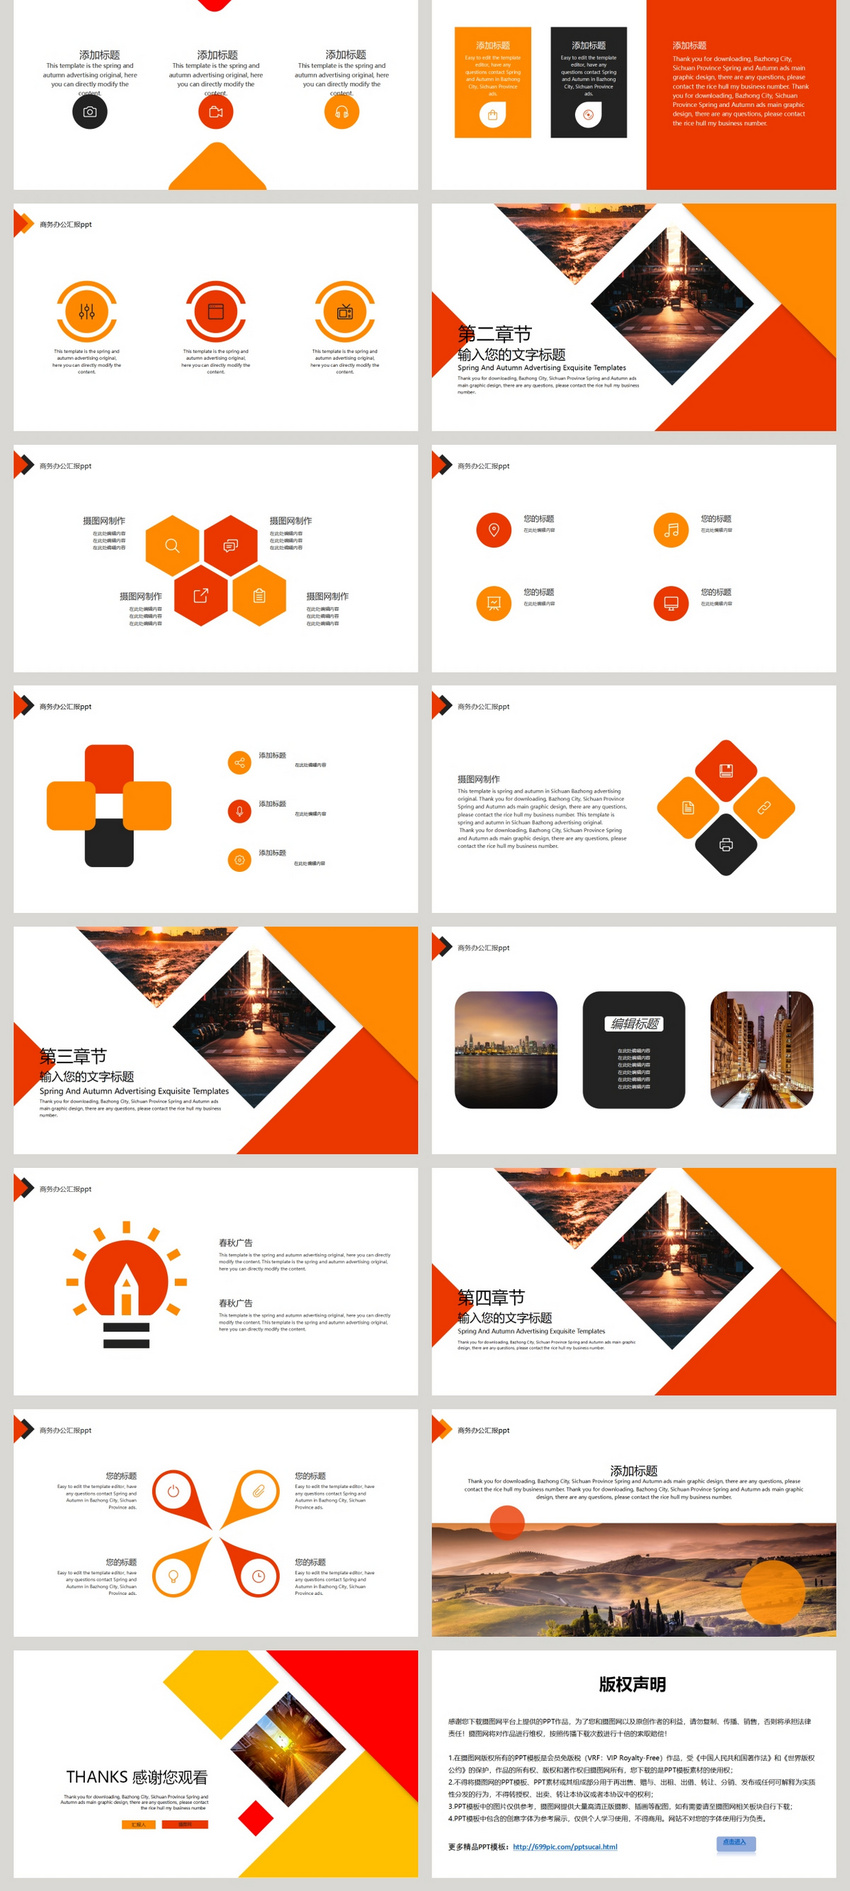 2019 Business Report Ppt Template Powerpoint Templete Ppt Free Download 400787363 Lovepik Com